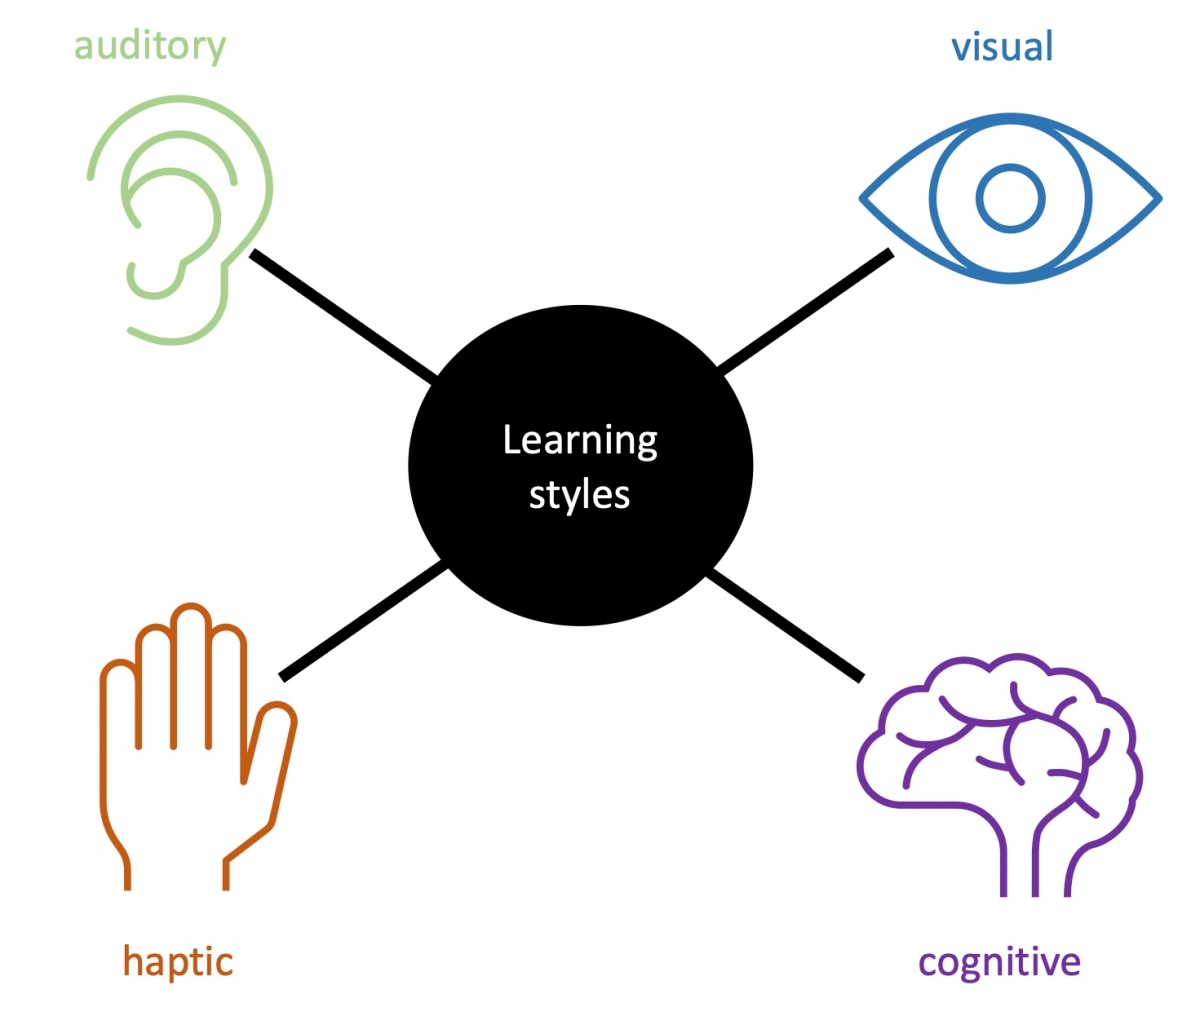 Figure 1: Overview of four frequently distinguished learning styles